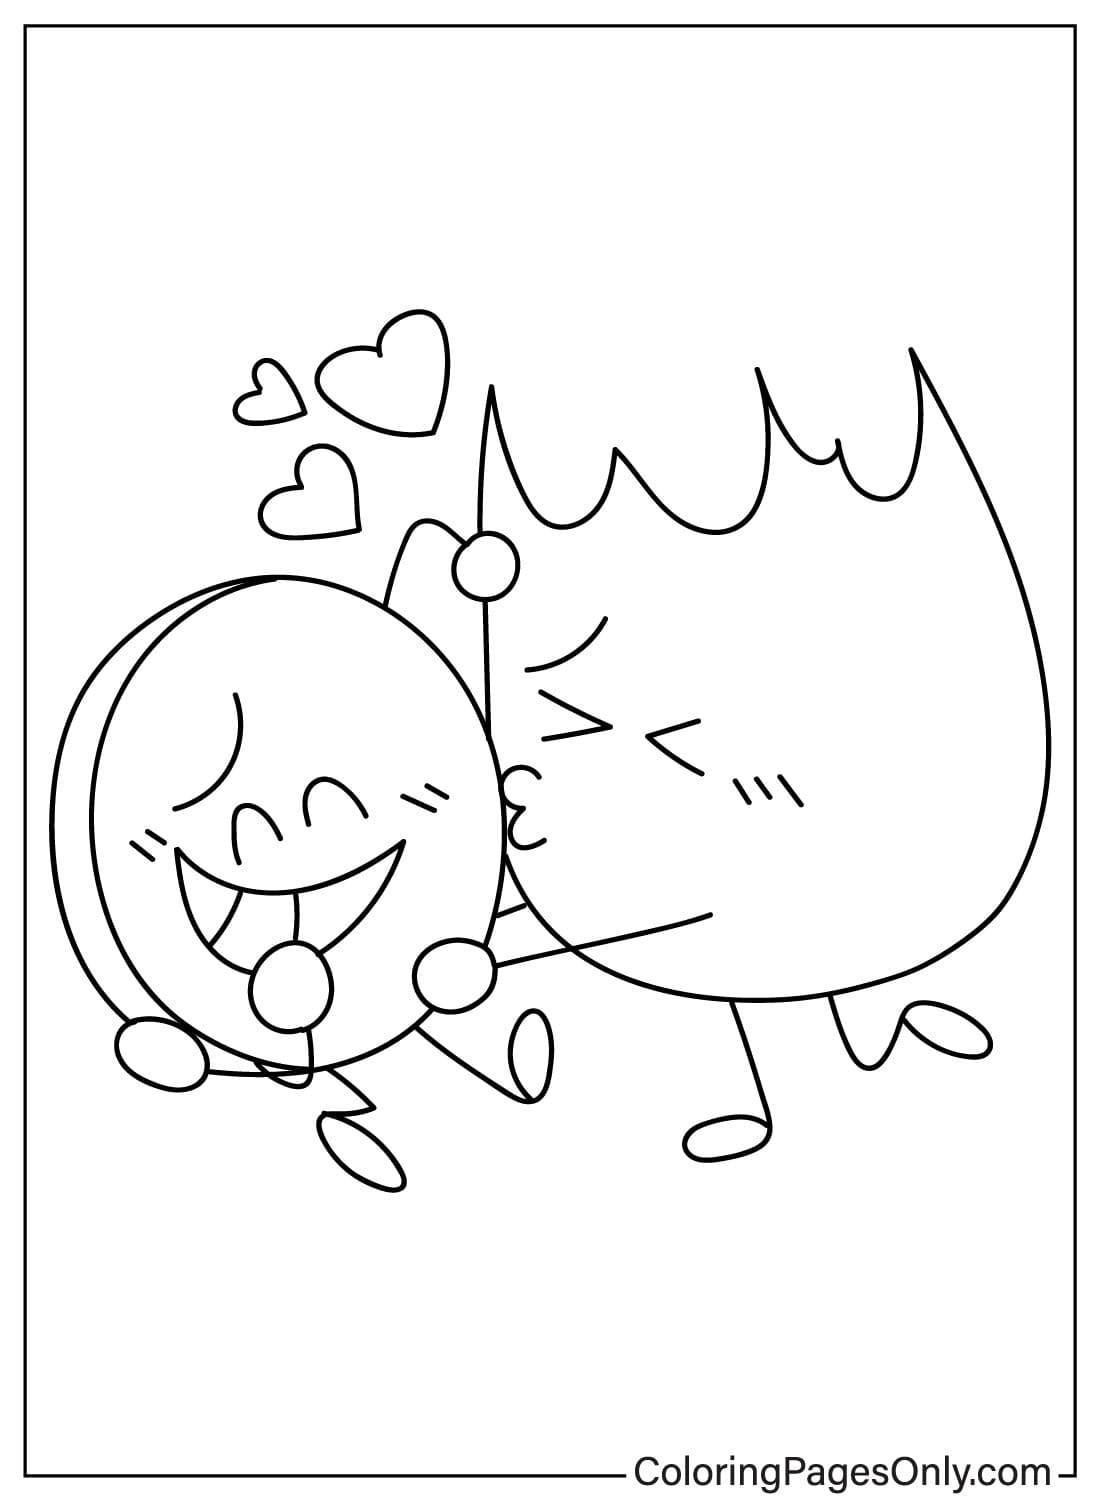 BFDI Coloring Page to Print from Battle for Dream Island